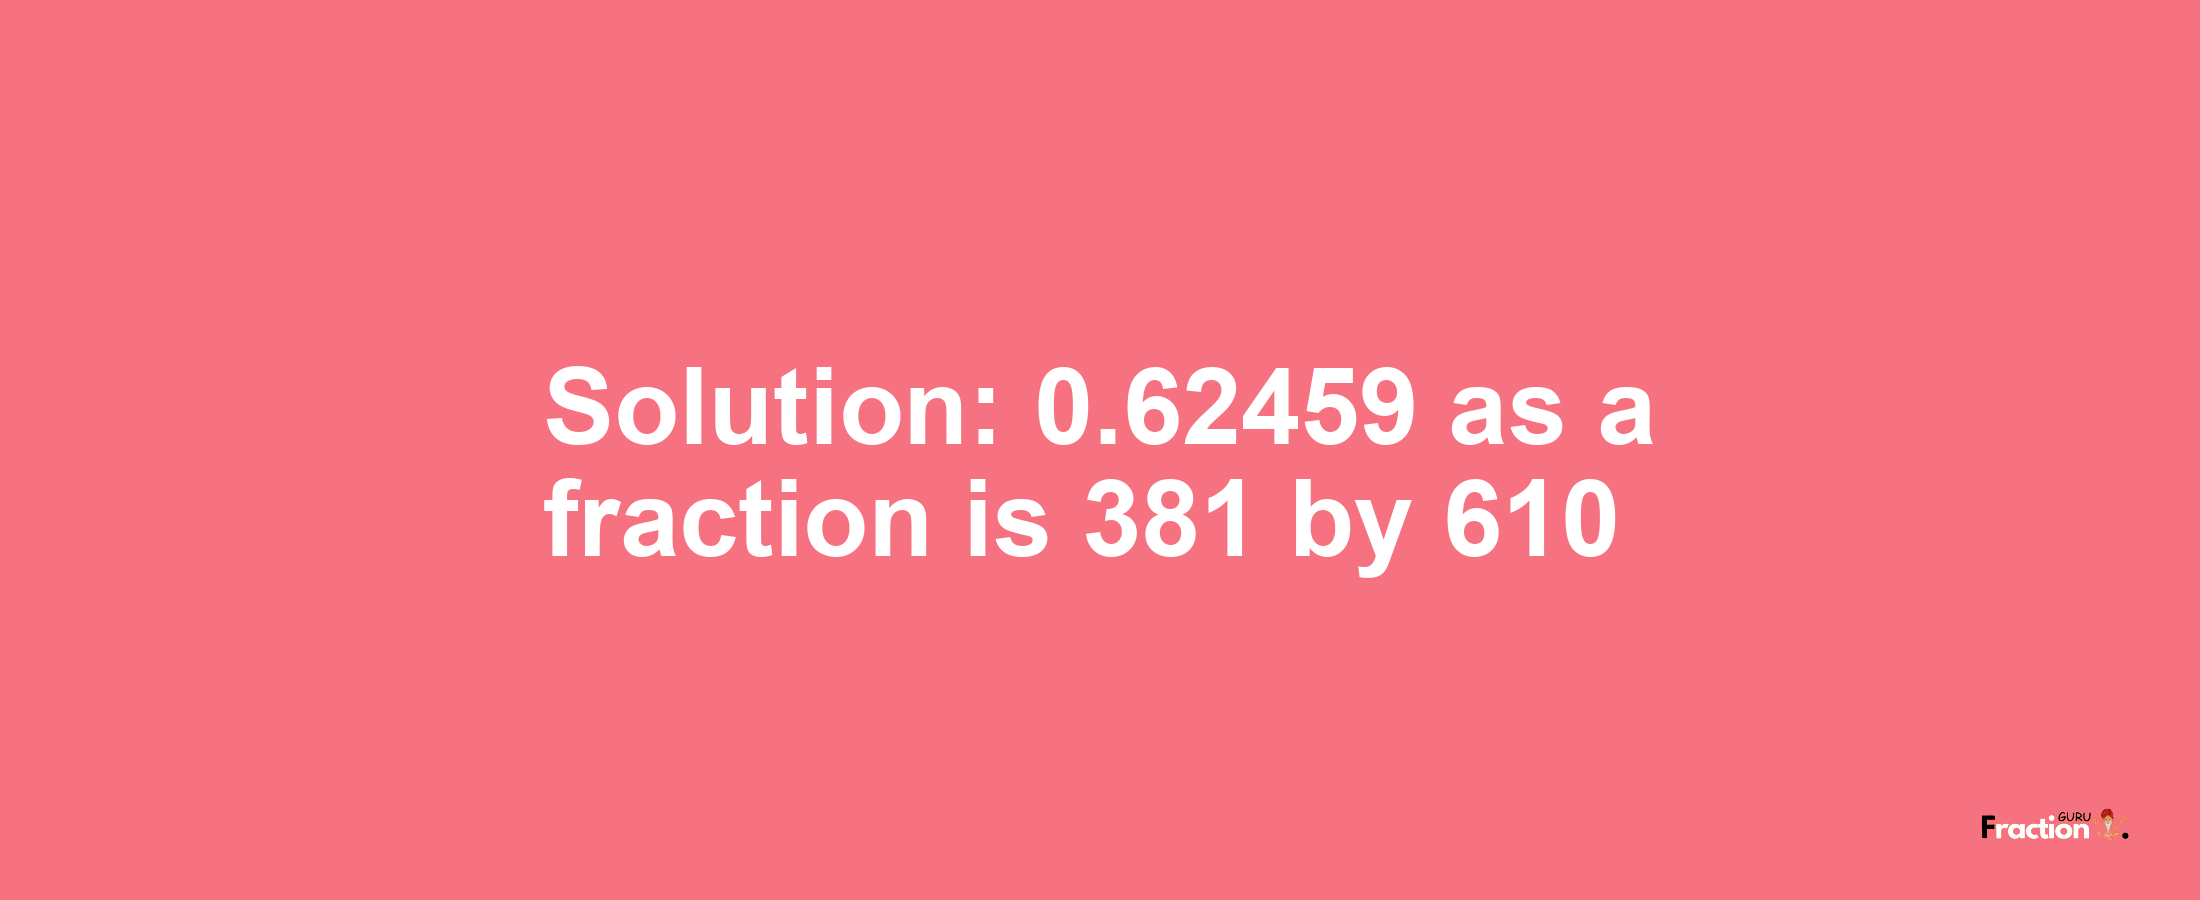 Solution:0.62459 as a fraction is 381/610